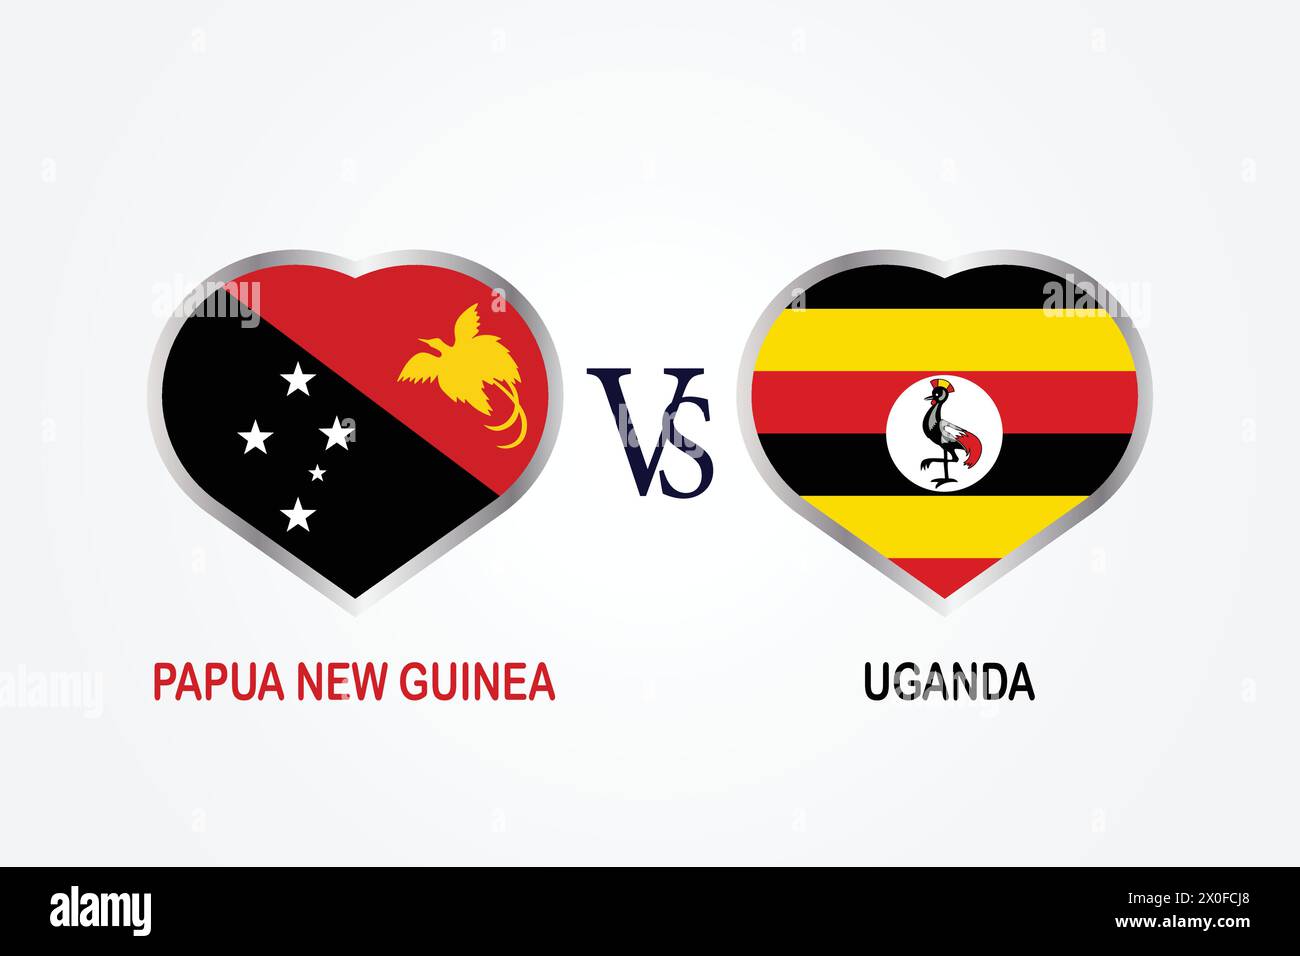 Papua New Guinea Vs Uganda, Cricket Match concept with creative illustration of participant countries flag Batsman and Hearts isolated on white Stock Vector